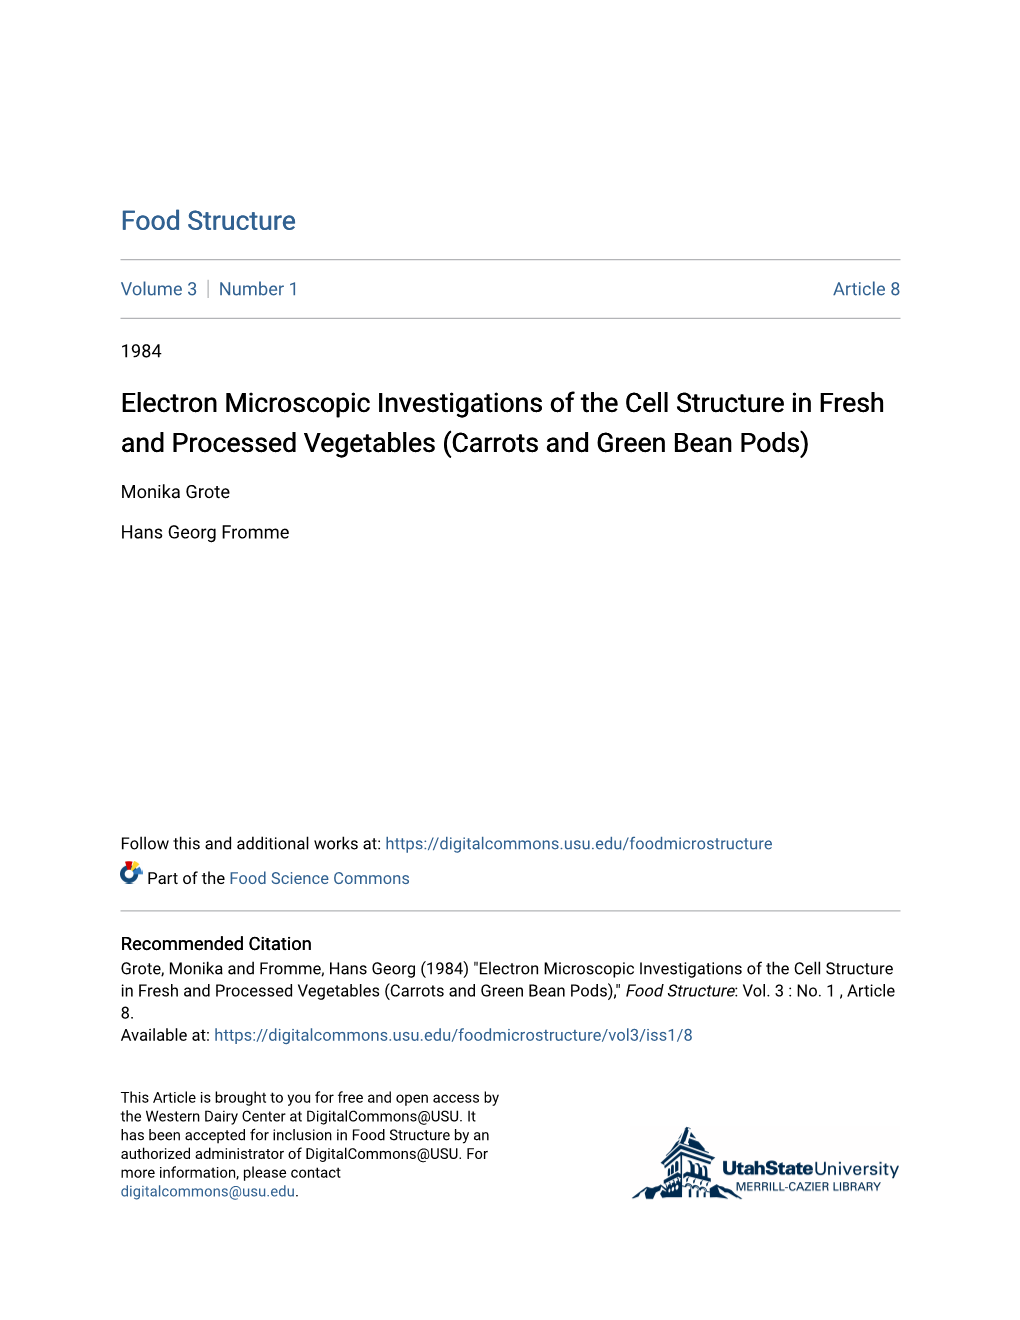 Electron Microscopic Investigations of the Cell Structure in Fresh and Processed Vegetables (Carrots and Green Bean Pods)